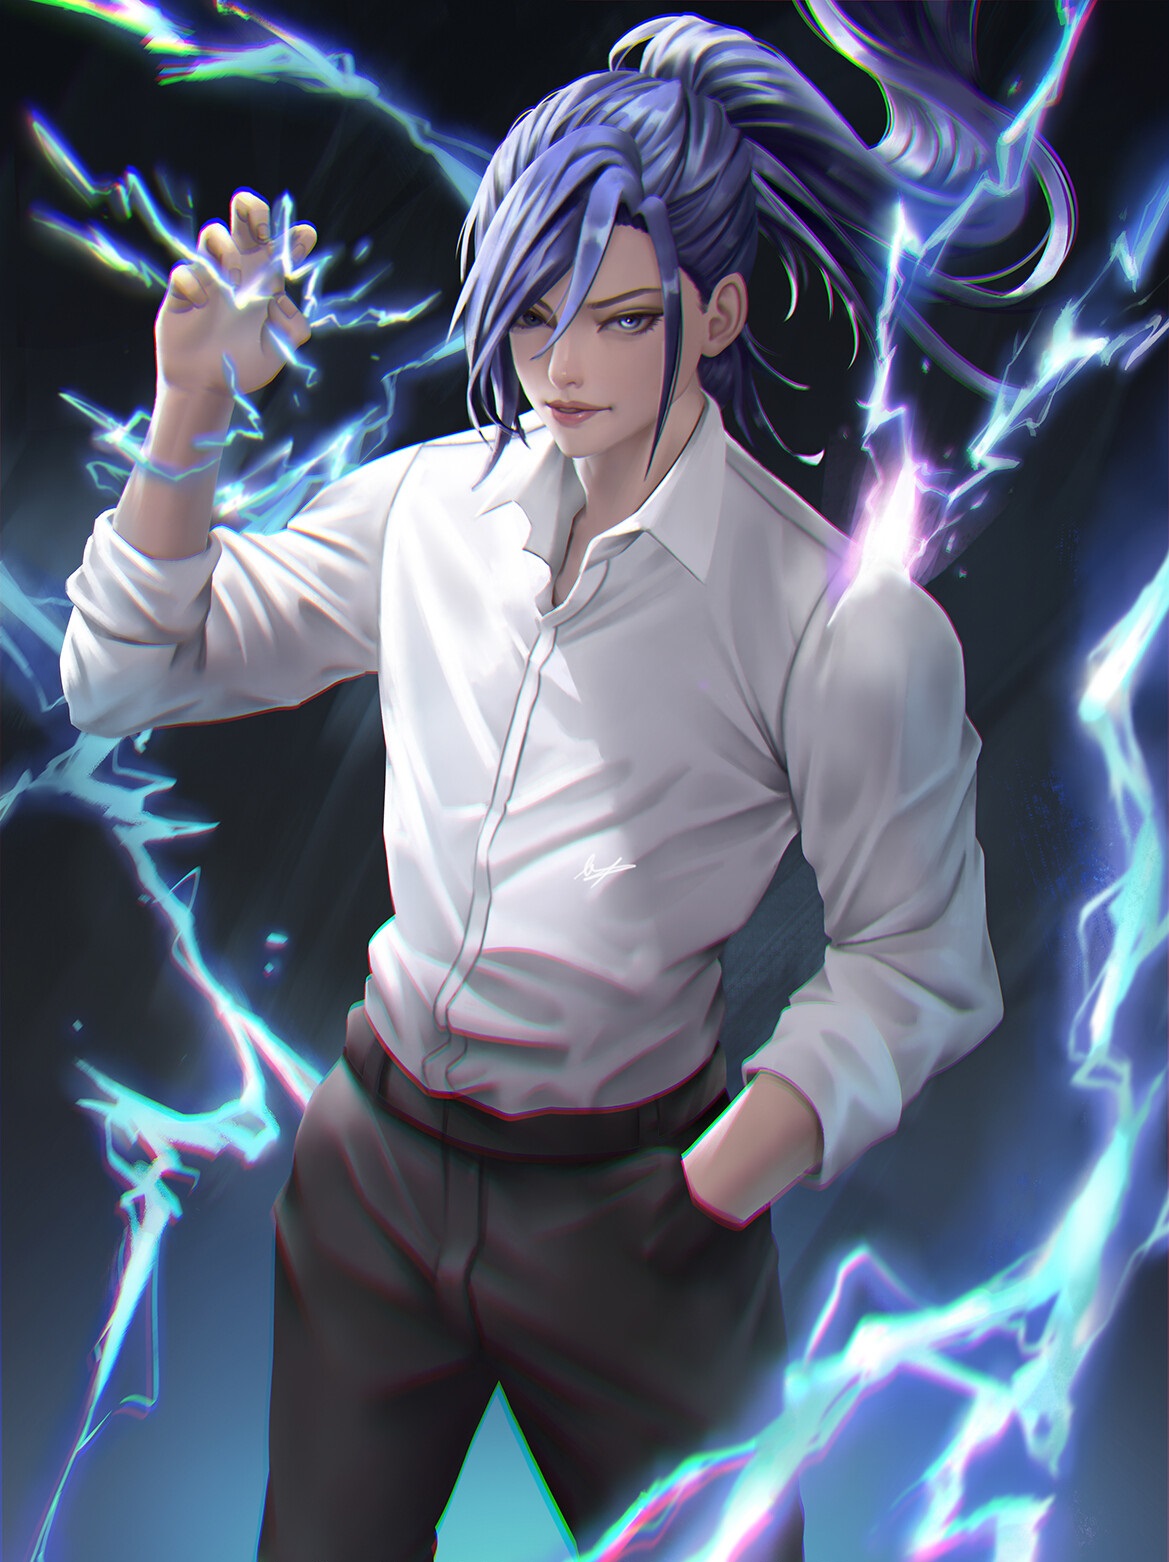  A women with purple hair wearing dress shirt and pants standing in front of a lightning bolt.